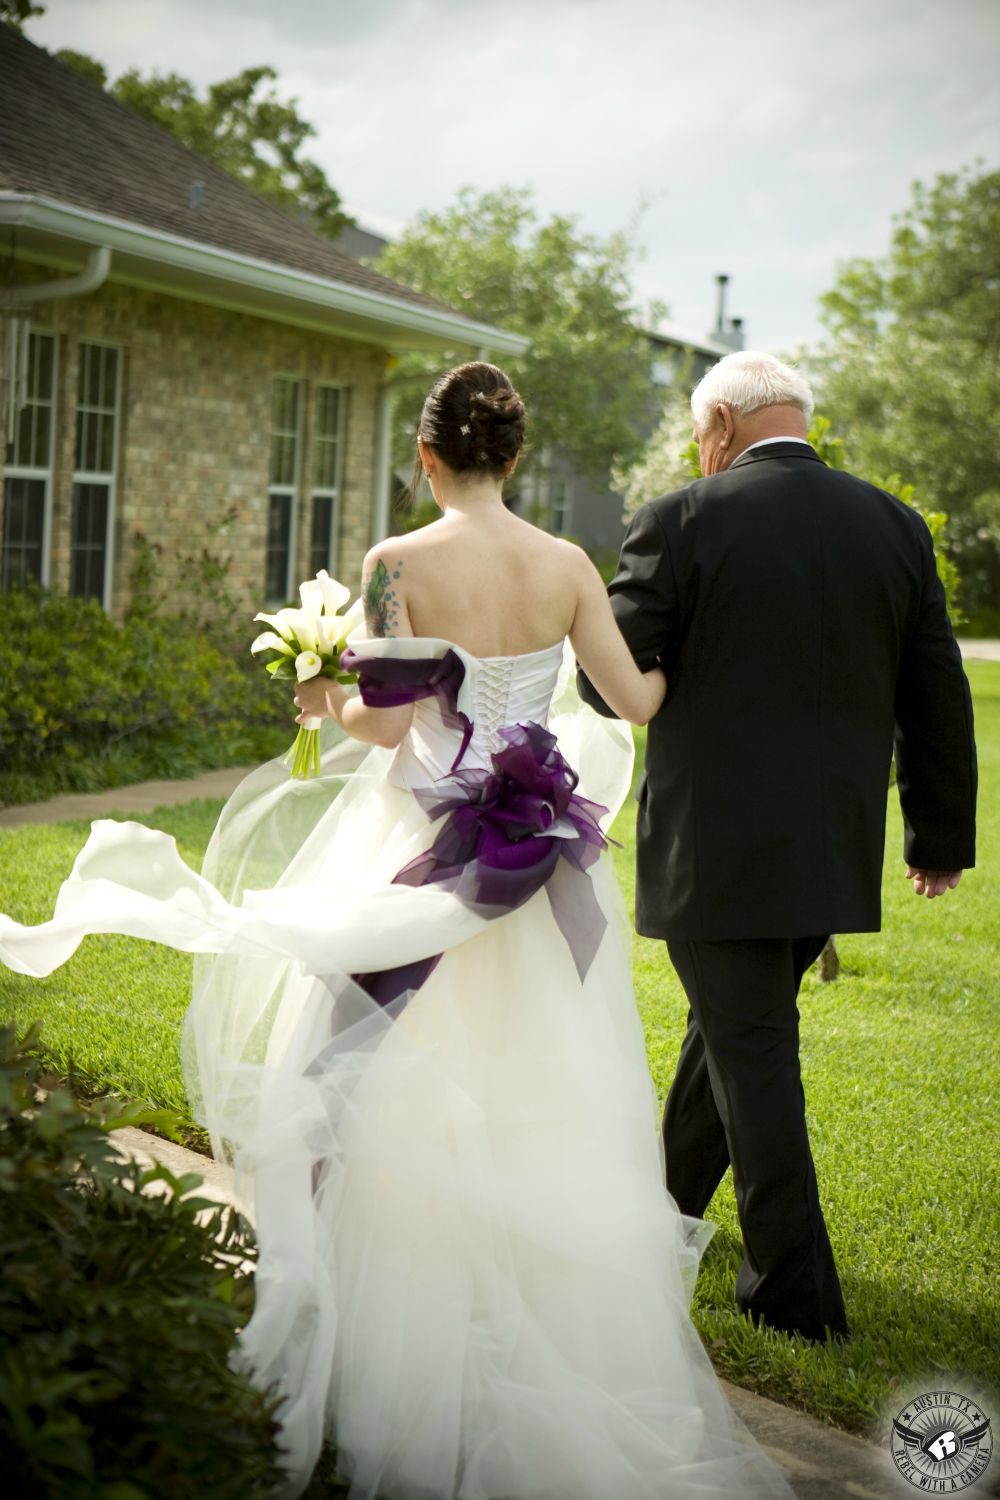 Austin wedding photographer took picture of back of bride in beautiful custom designed haute couture wedding dress with deep purple sash and her father in black tuxedo walking to the wedding ceremony at the Phoenix wedding venue in Columbus, Texas.